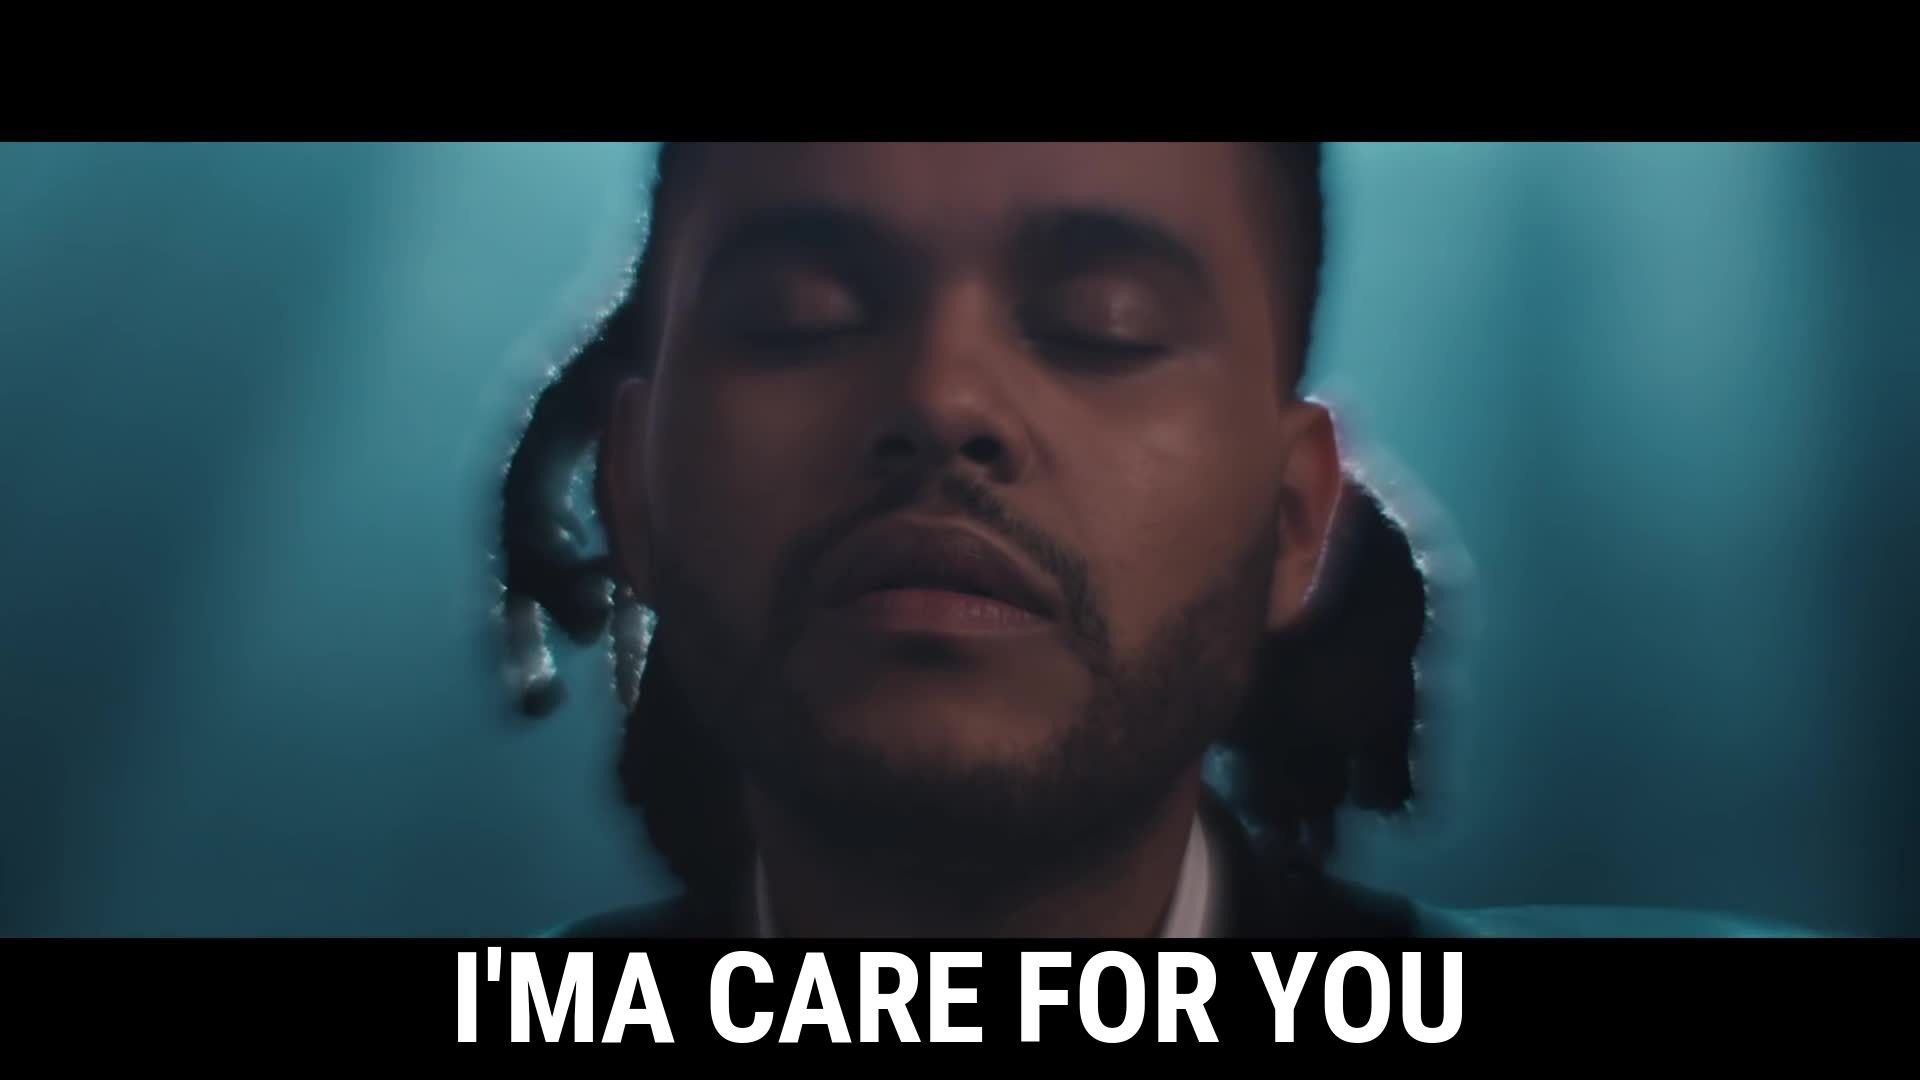 1920x1080 I'ma care for you / The Weeknd